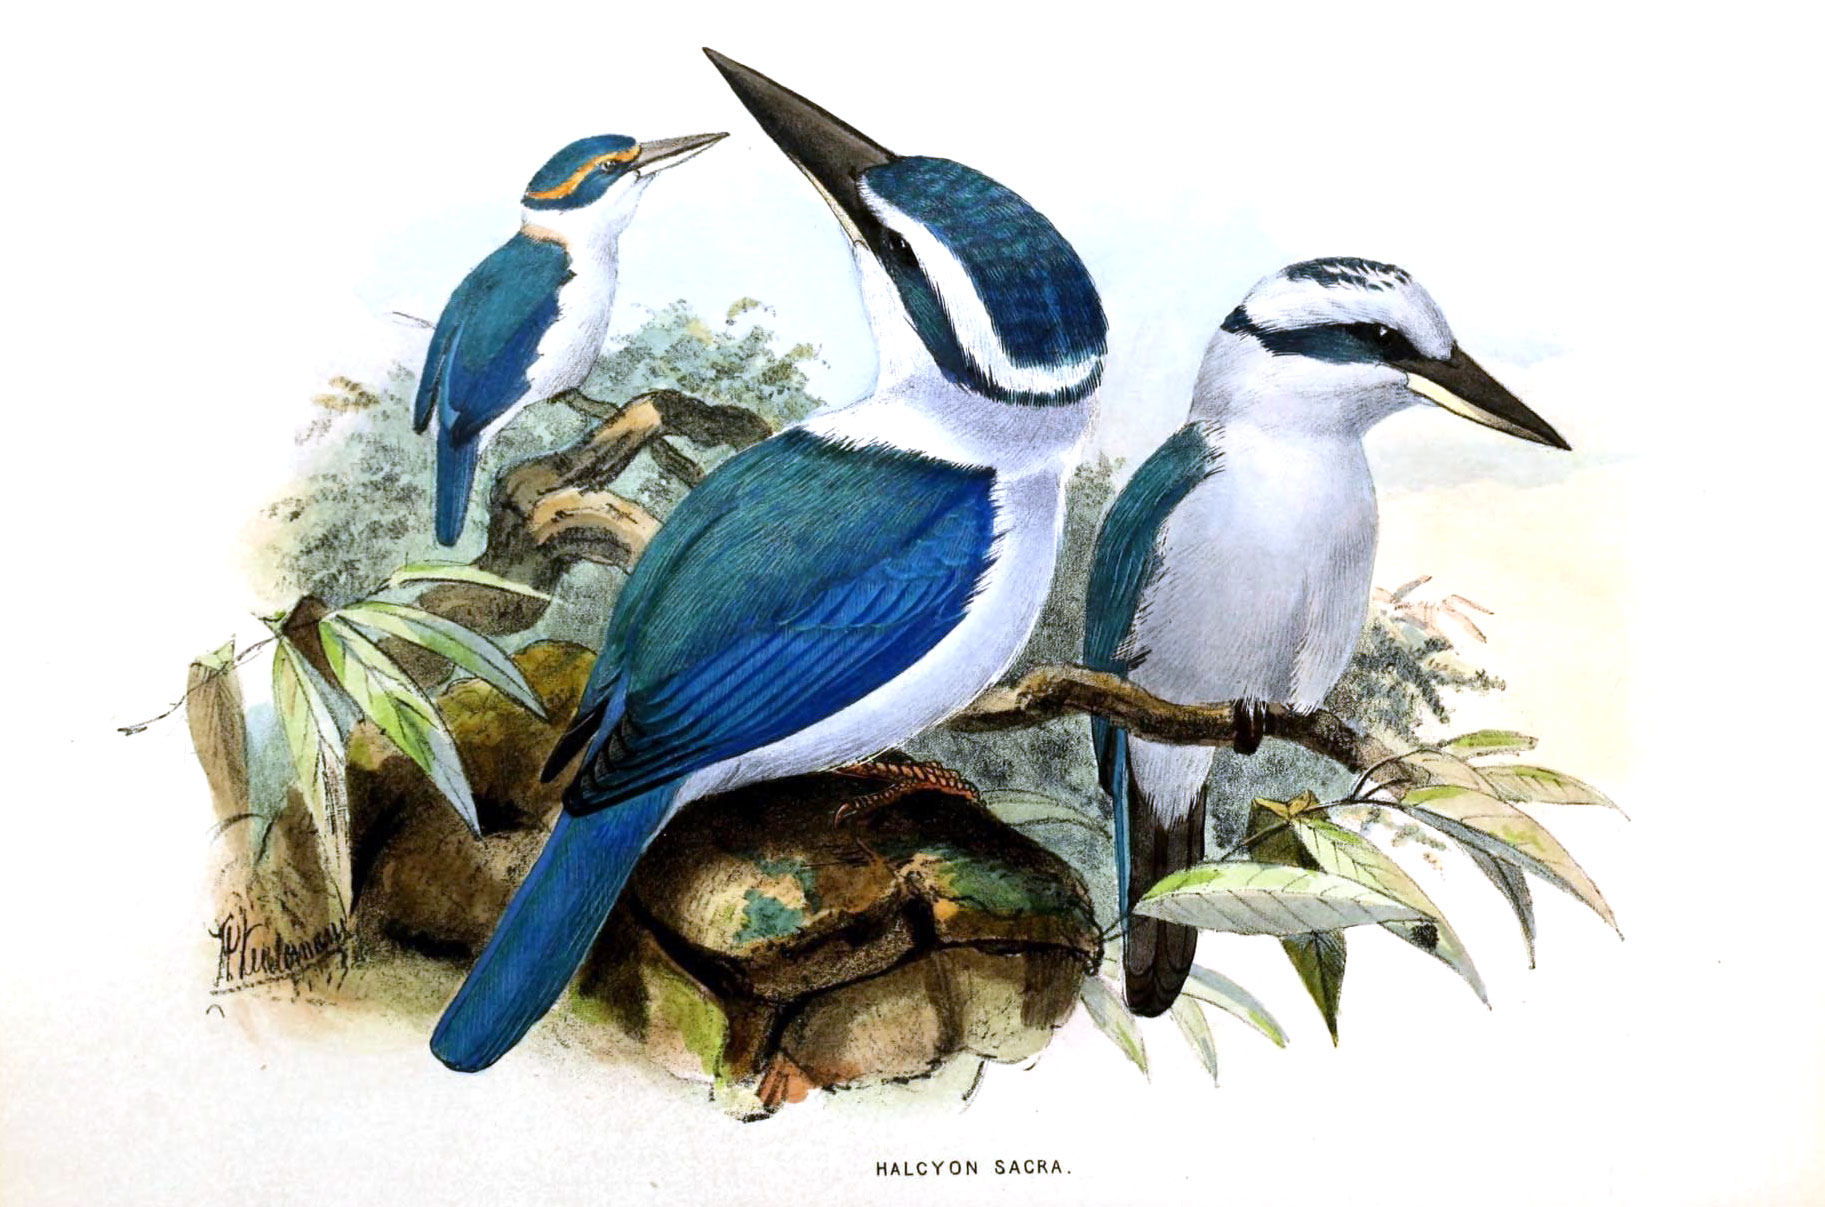 A color illustration of three white-collared kingfishers sitting on the branches of a tree. The illustration shows two blue and white birds in the foreground and one blue and white bird in the background. All three birds have a blue back, wings, and tail, a white chest and chin, a white band around their necks, and black beaks. The vary in the color of the tops of their heads. One has a blue cap with an orange stripe, one has a blue cap with a white stripe, and one has a mostly white head with a blue stripe and a blue patch on the top of its head.